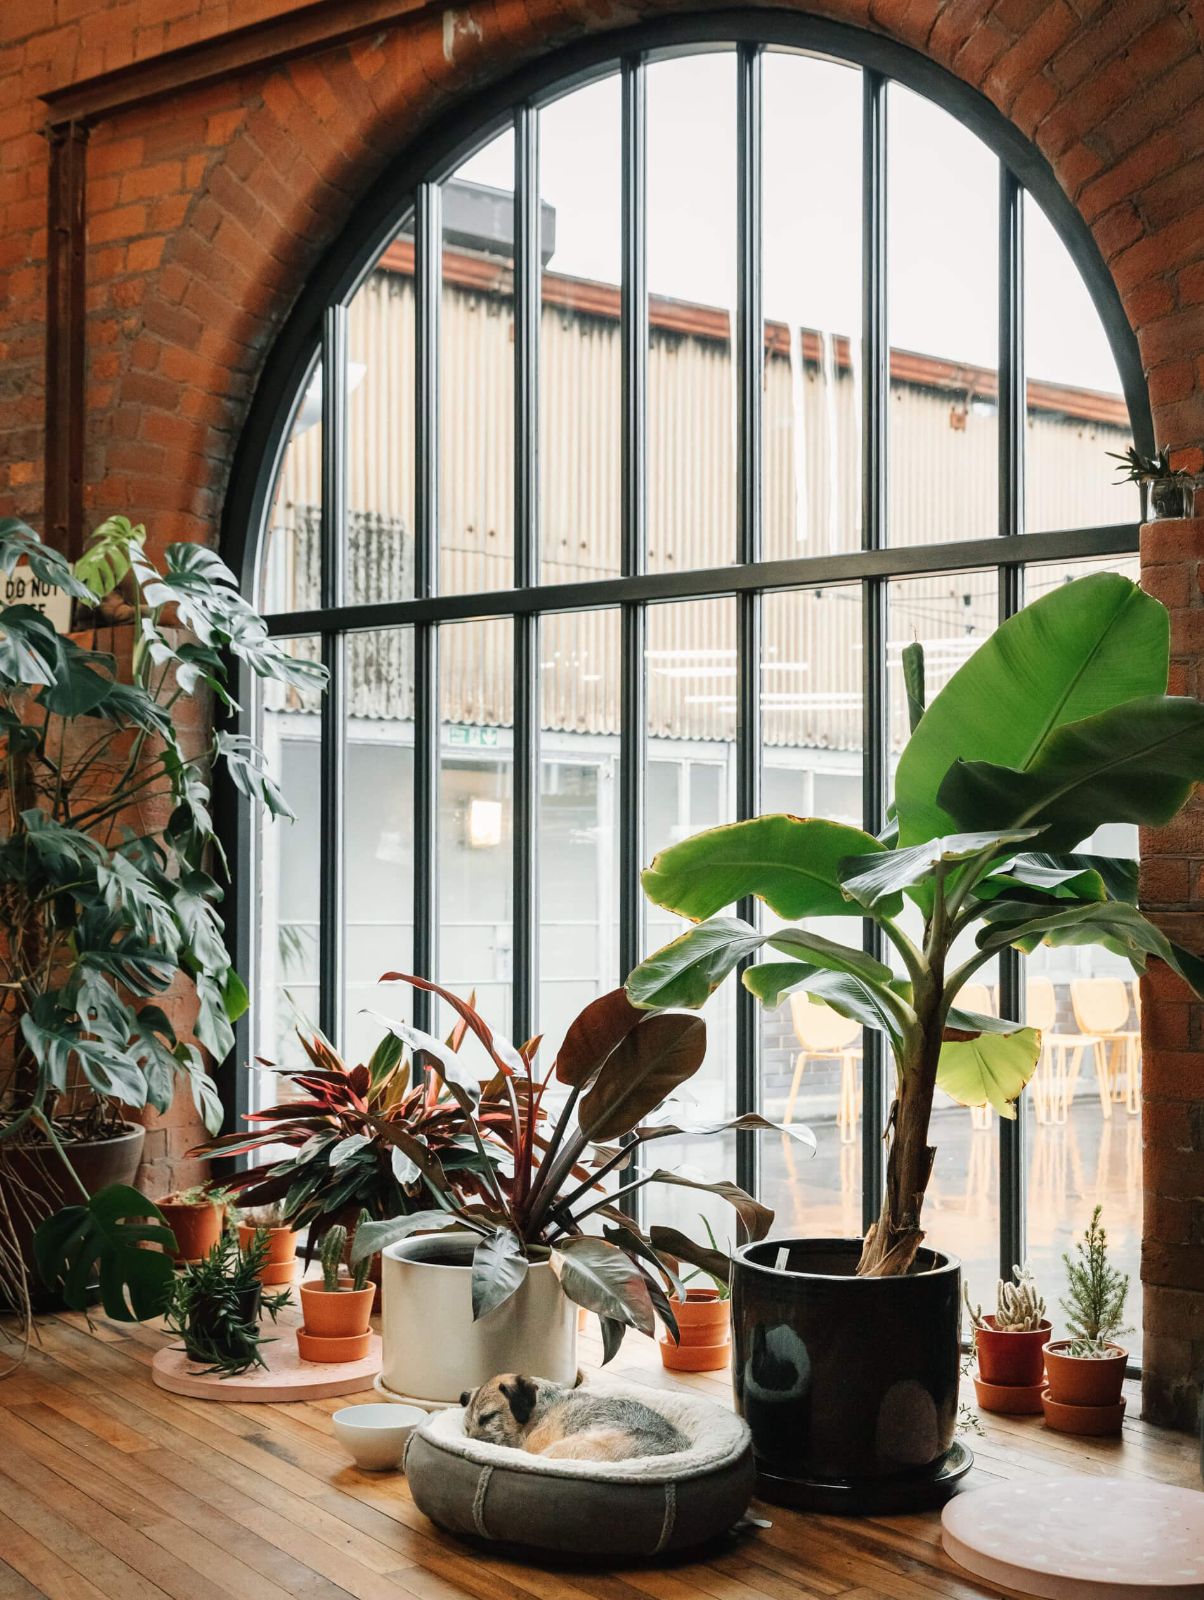 Large arched window inside an old redbrick building with large houseplants and a dog curled up in a dog bed at the 93 studio 